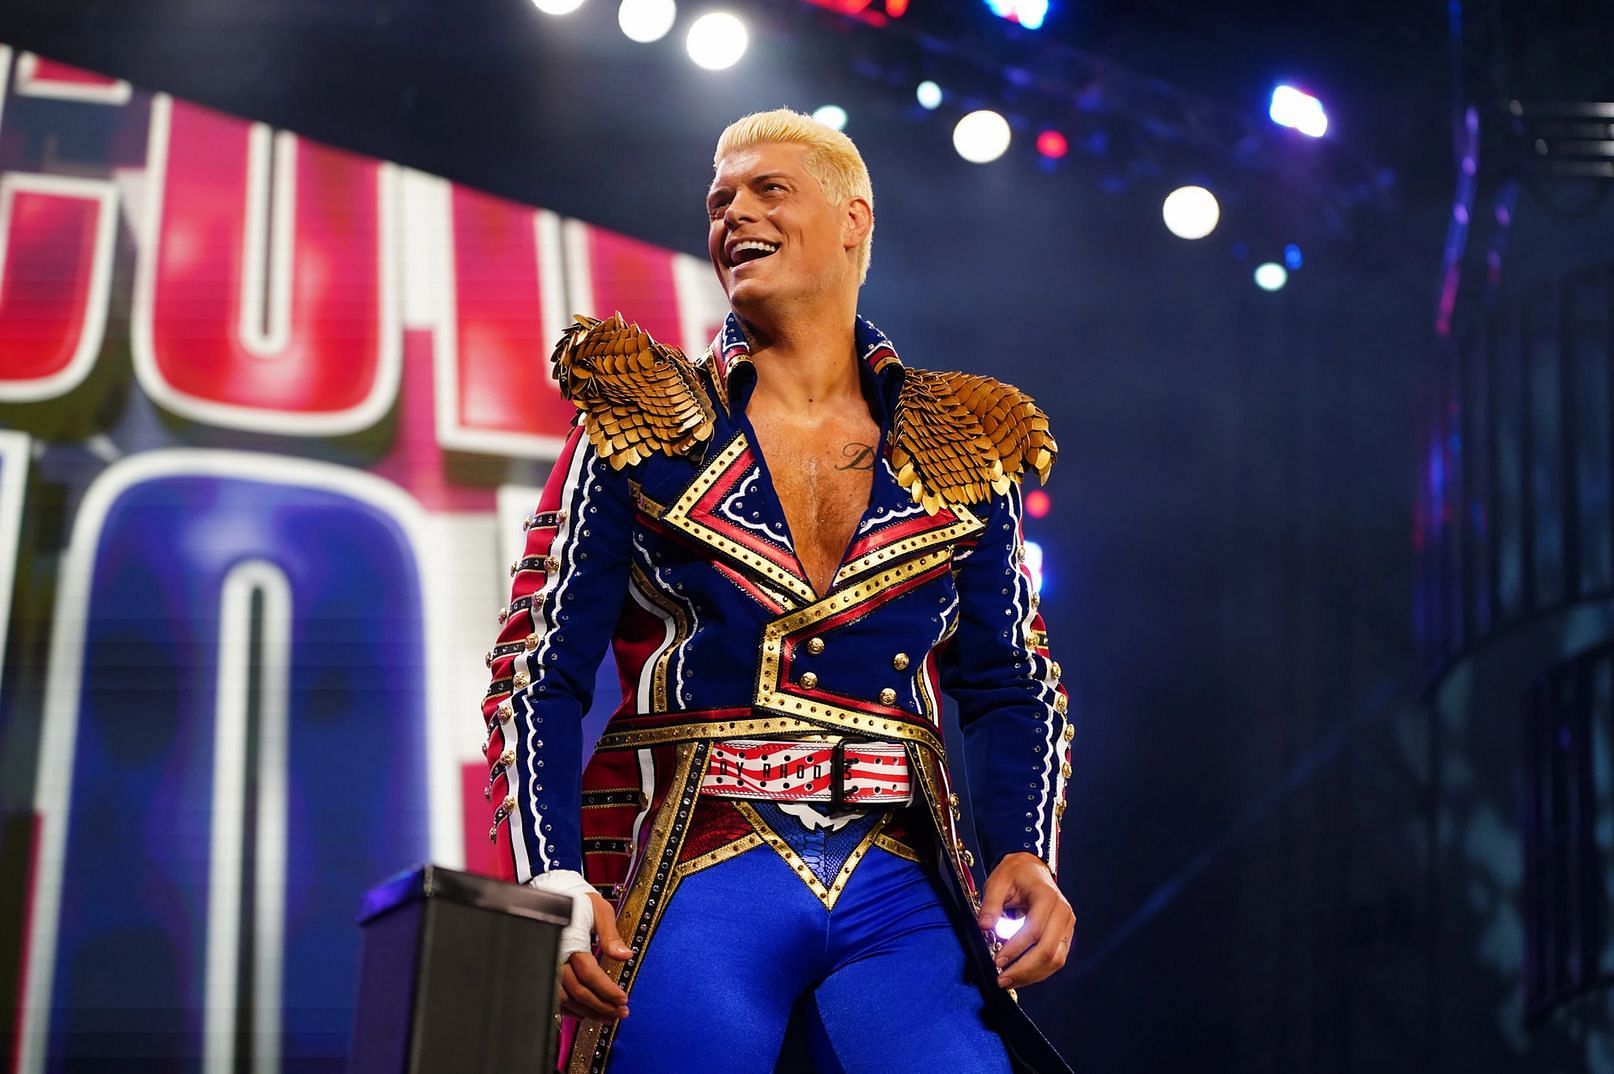 Cody Rhodes at AEW Double or Nothing 2021